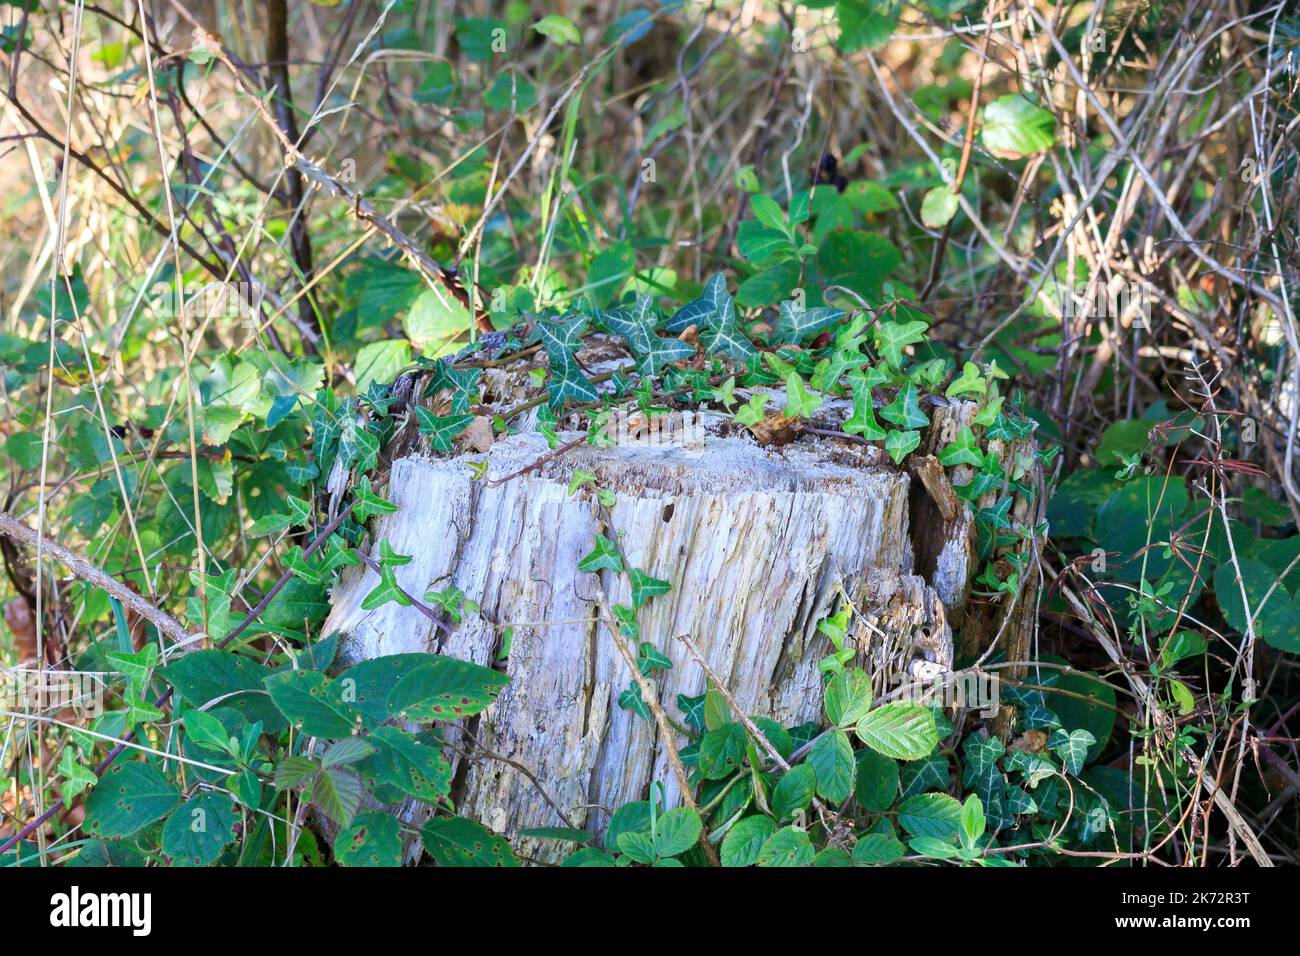 Ivy growing over an old rotting woodland tree stump Stock Photo